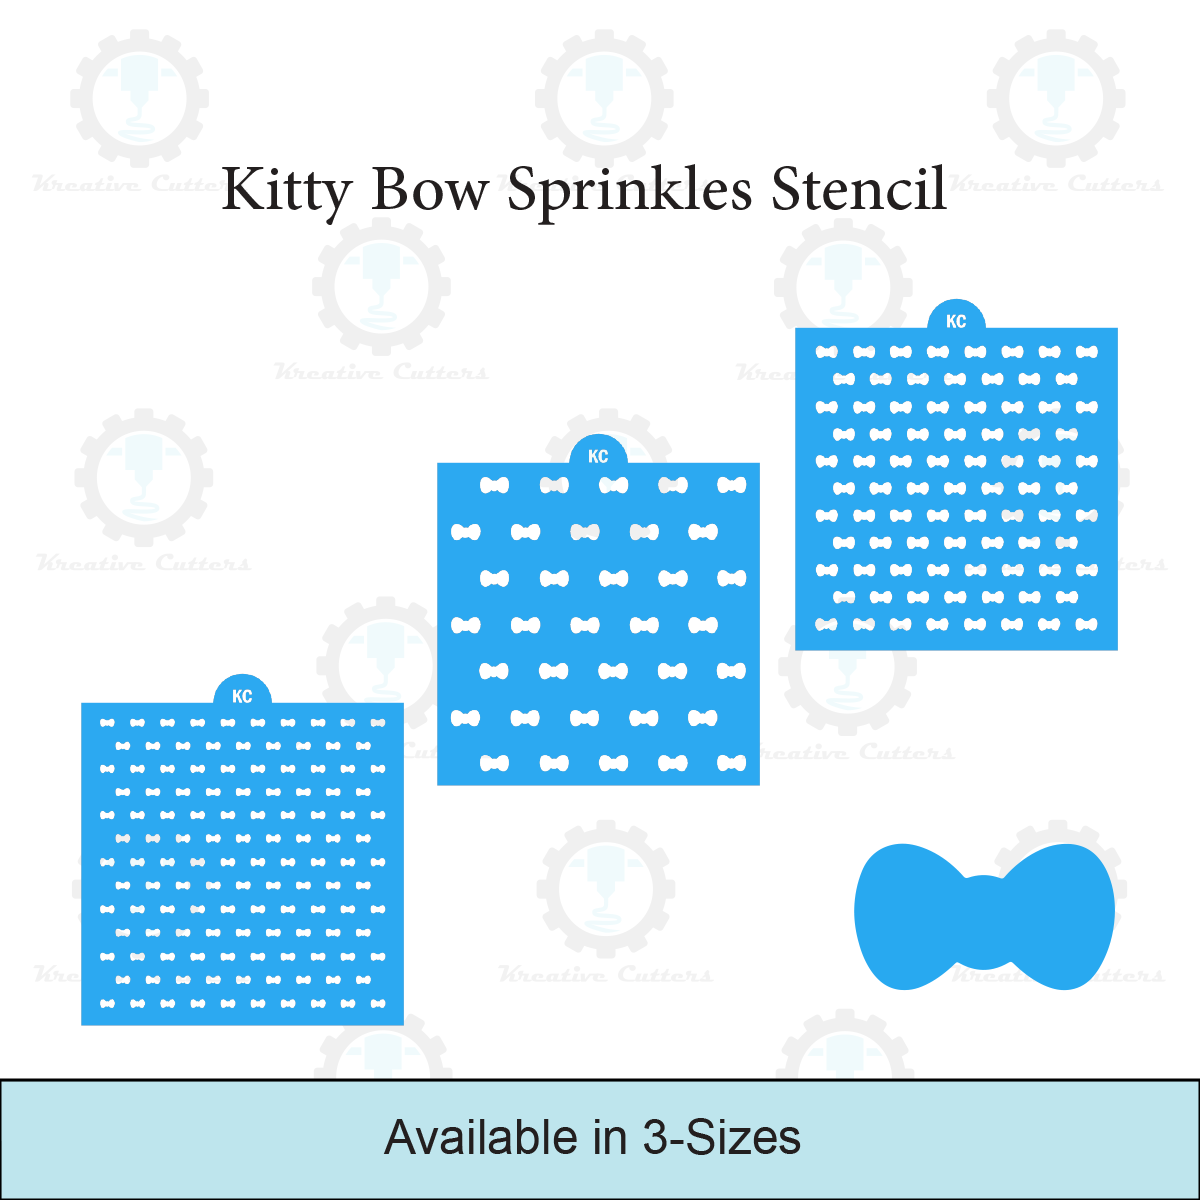 Kitty Bow Sprinkles Stencil | 3D Printed, Cookie, Cake, & Cupcake, Decorating Stencils